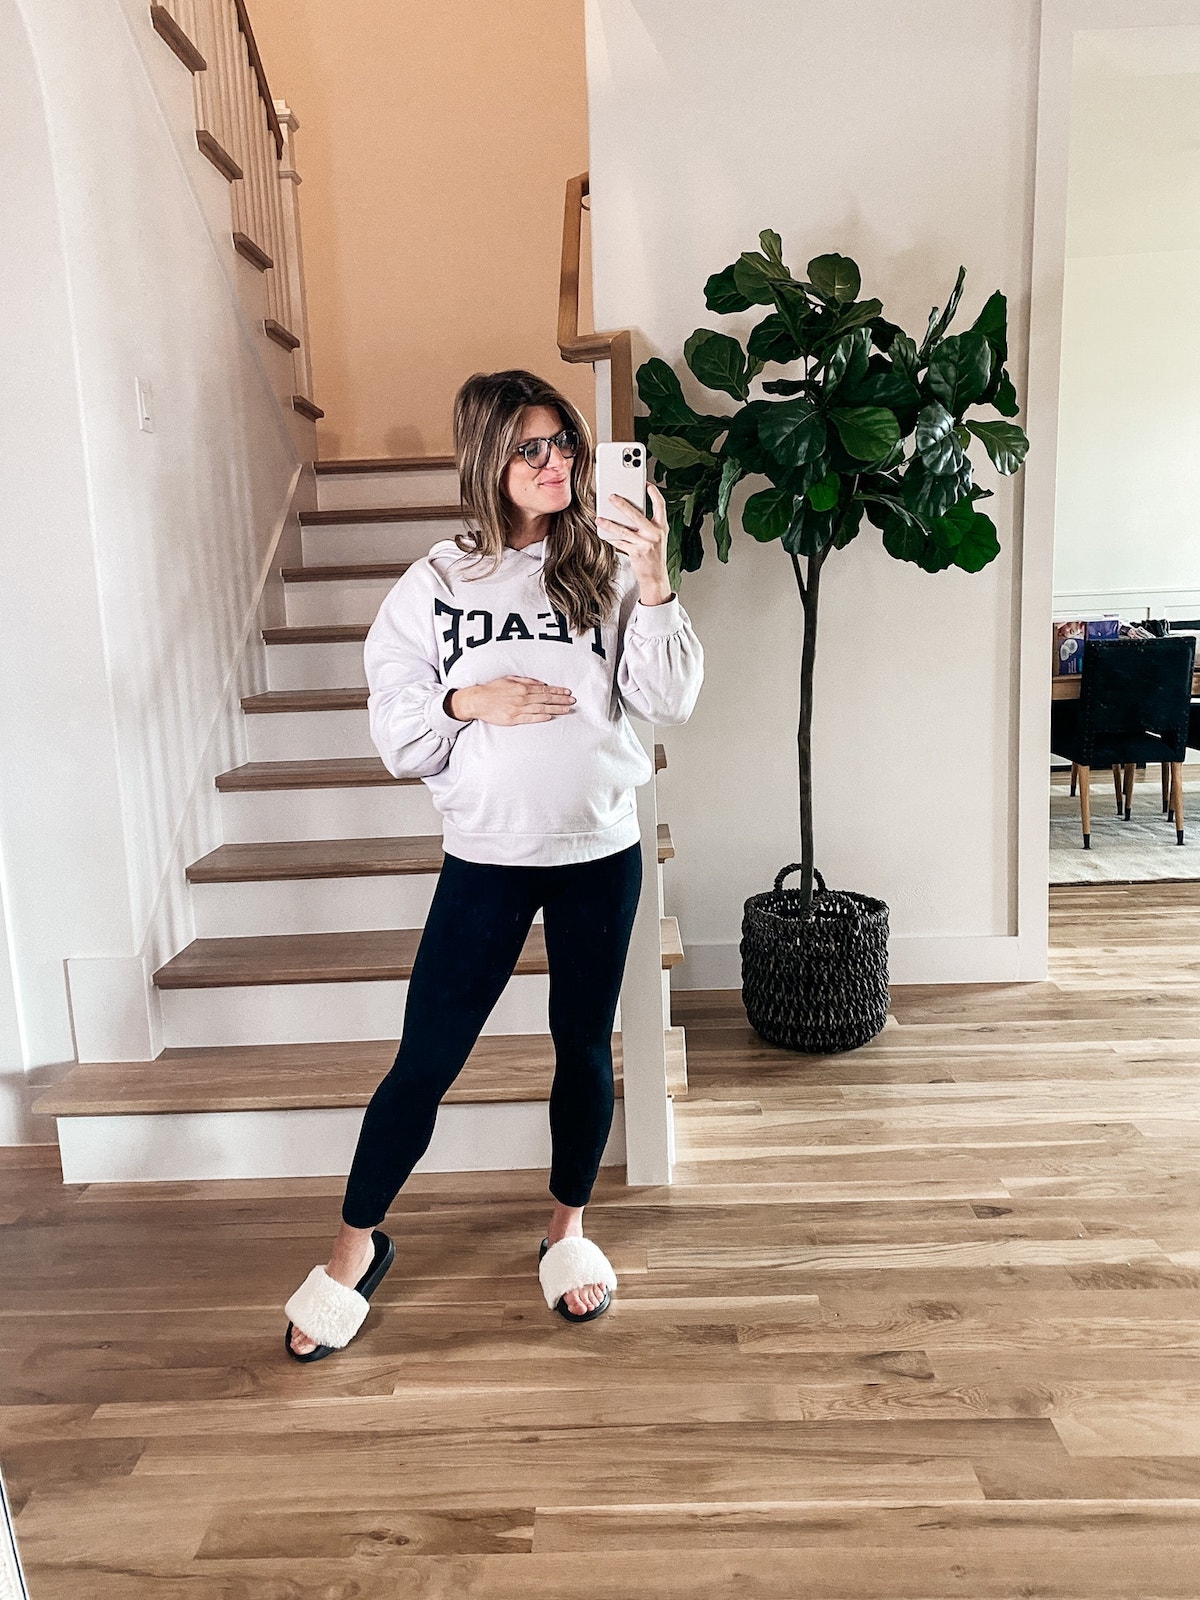 Brighton Butler wearing Topshop peace sweatshirt with maternity leggings and slippers